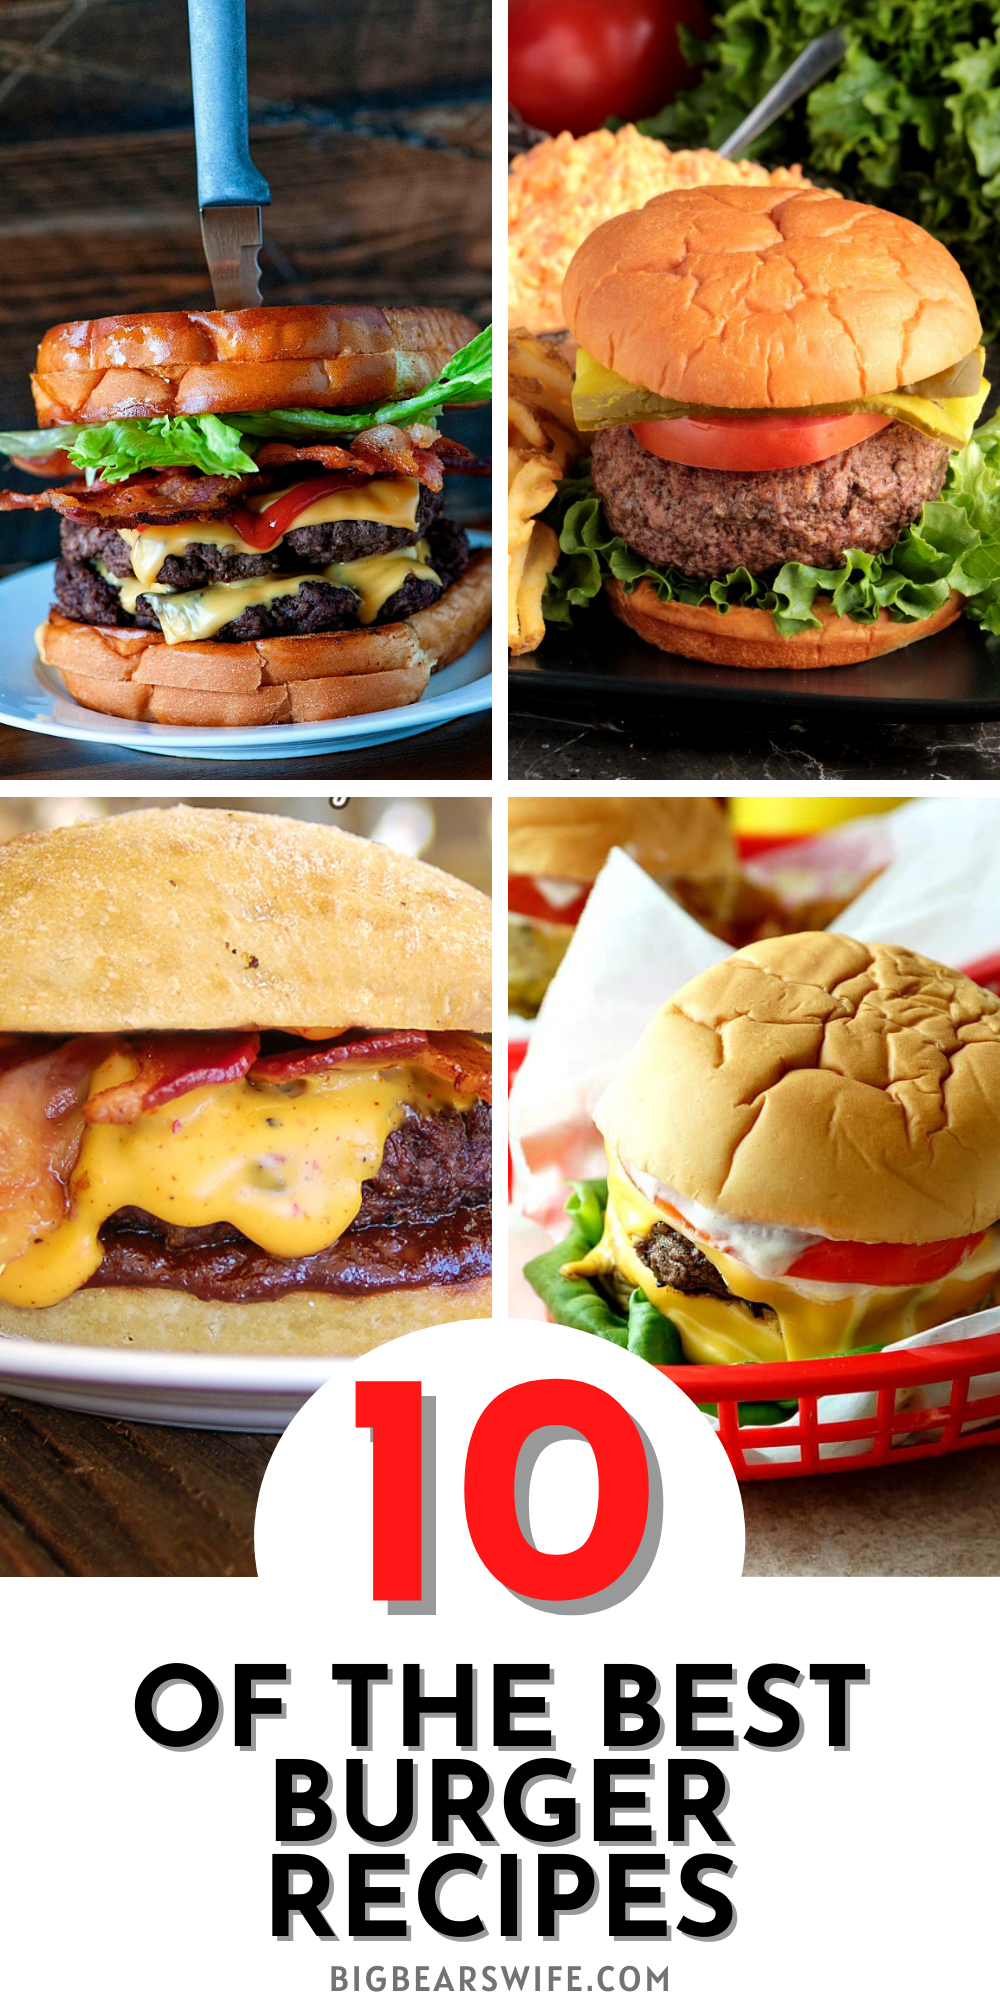 Warm weather is here which means it’s time to enjoy the back patio, start up the grill and spend some quality family time outside in the evenings! I’ve found 10 of the Best Burger Recipes for y’all to try that would be perfect for lunch or dinner.

 via @bigbearswife